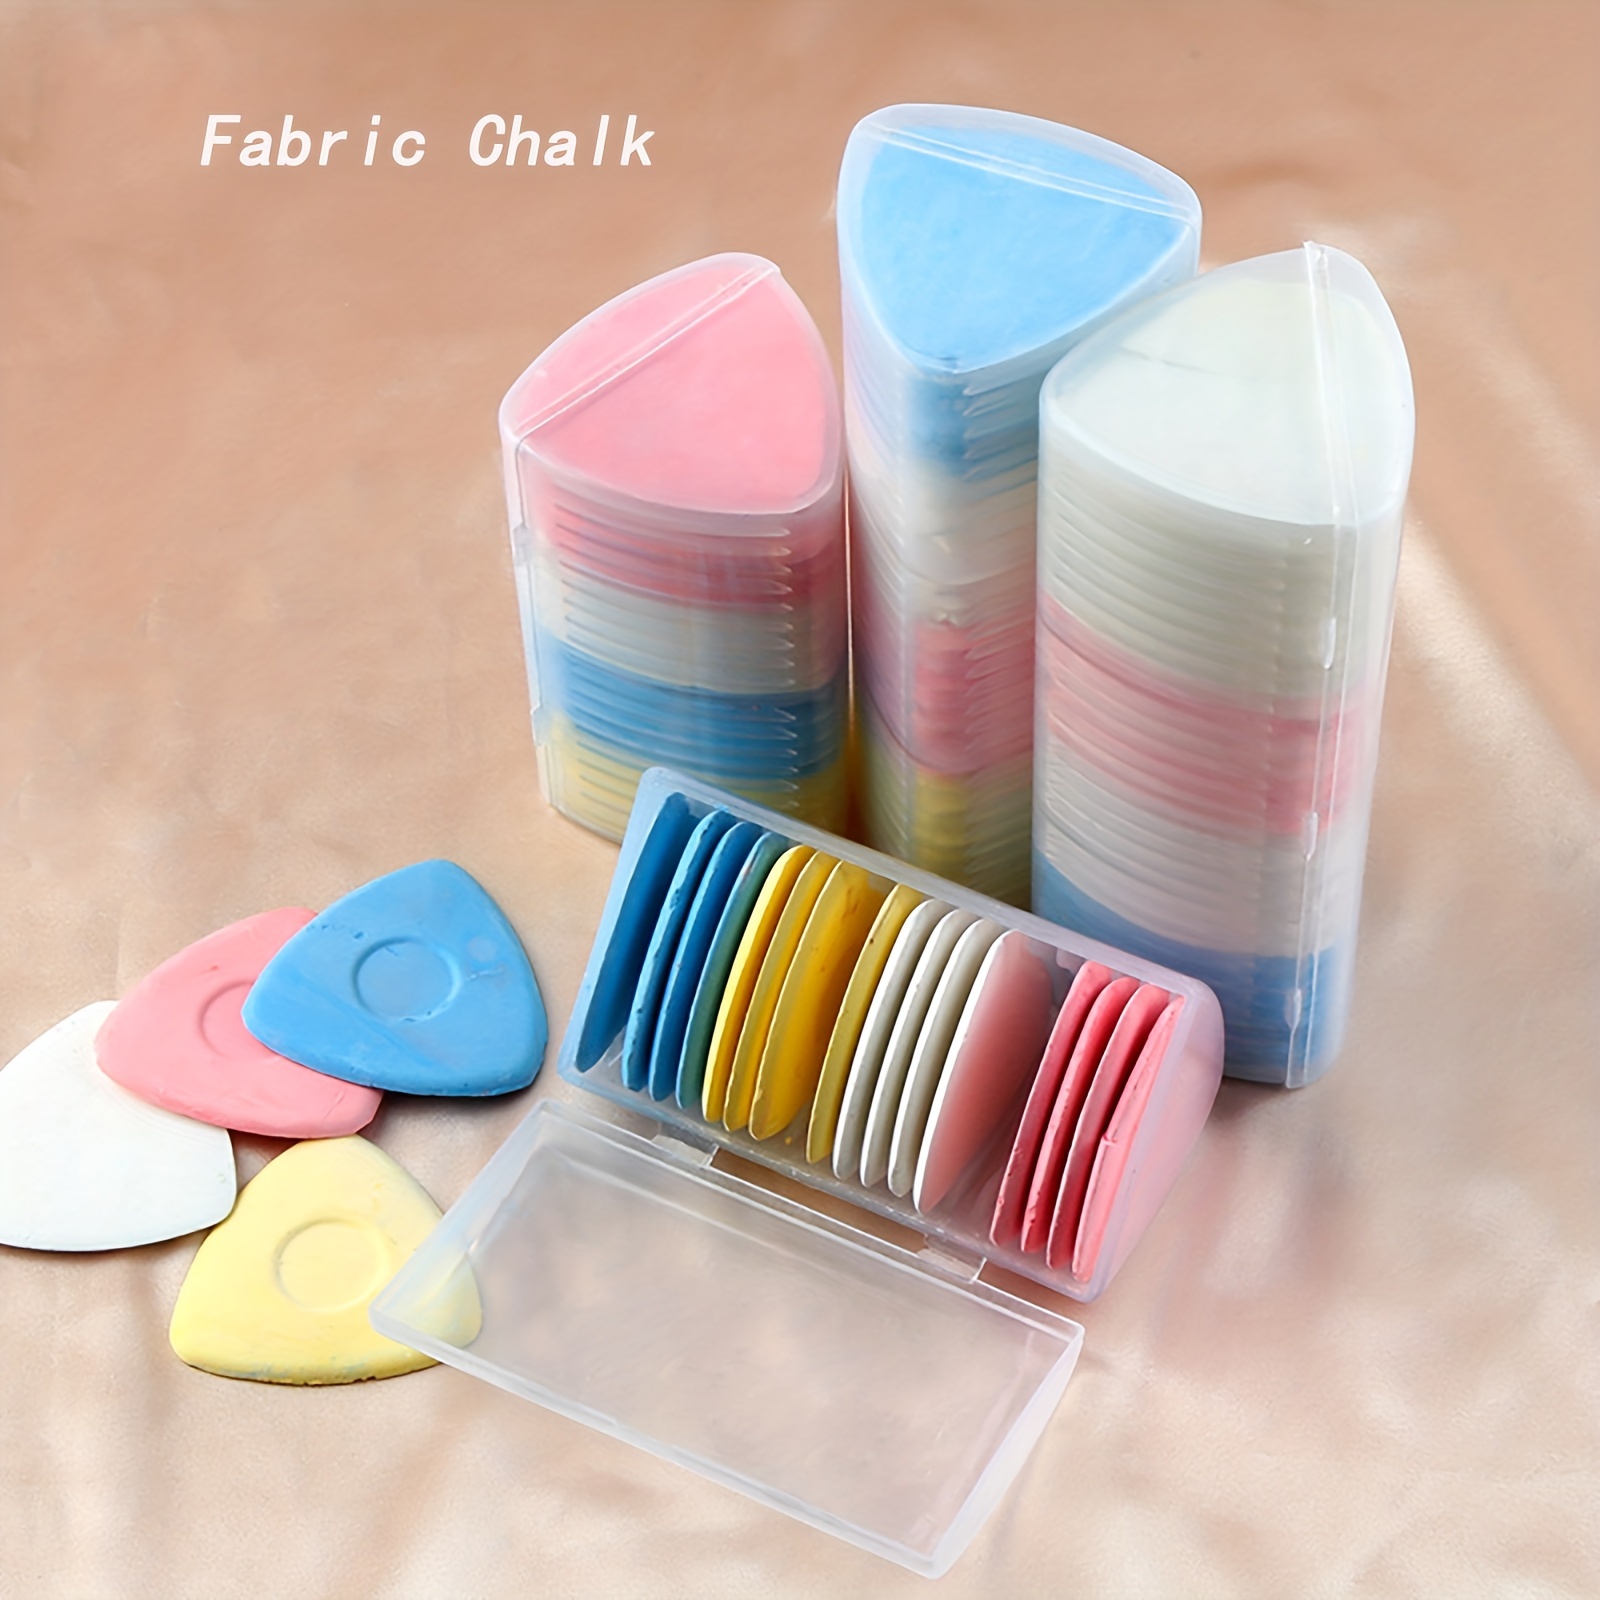 Chalk Sewing Tools Accessory, Tailor Chalk Sewing Tailors